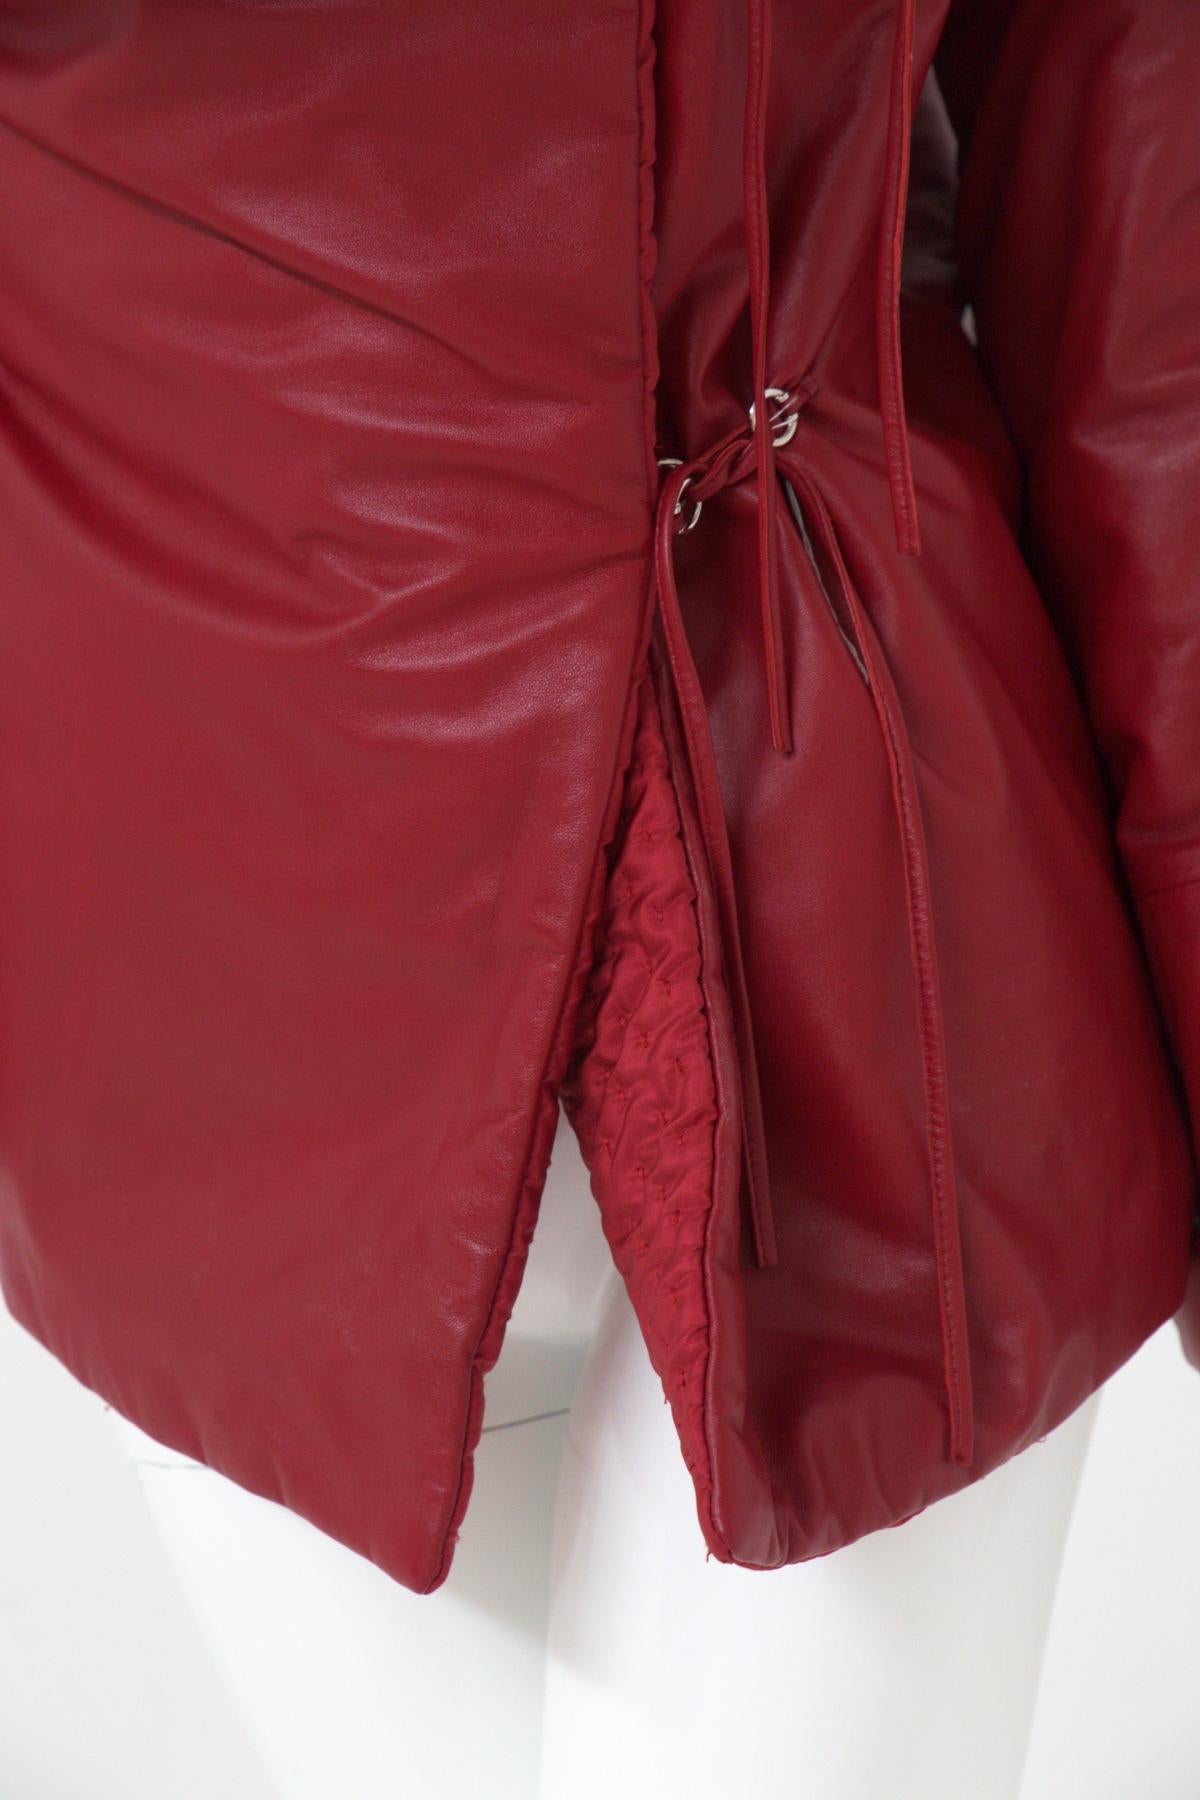 Gianfranco Ferré Rare Oversized Red Leather Jacket For Sale 1